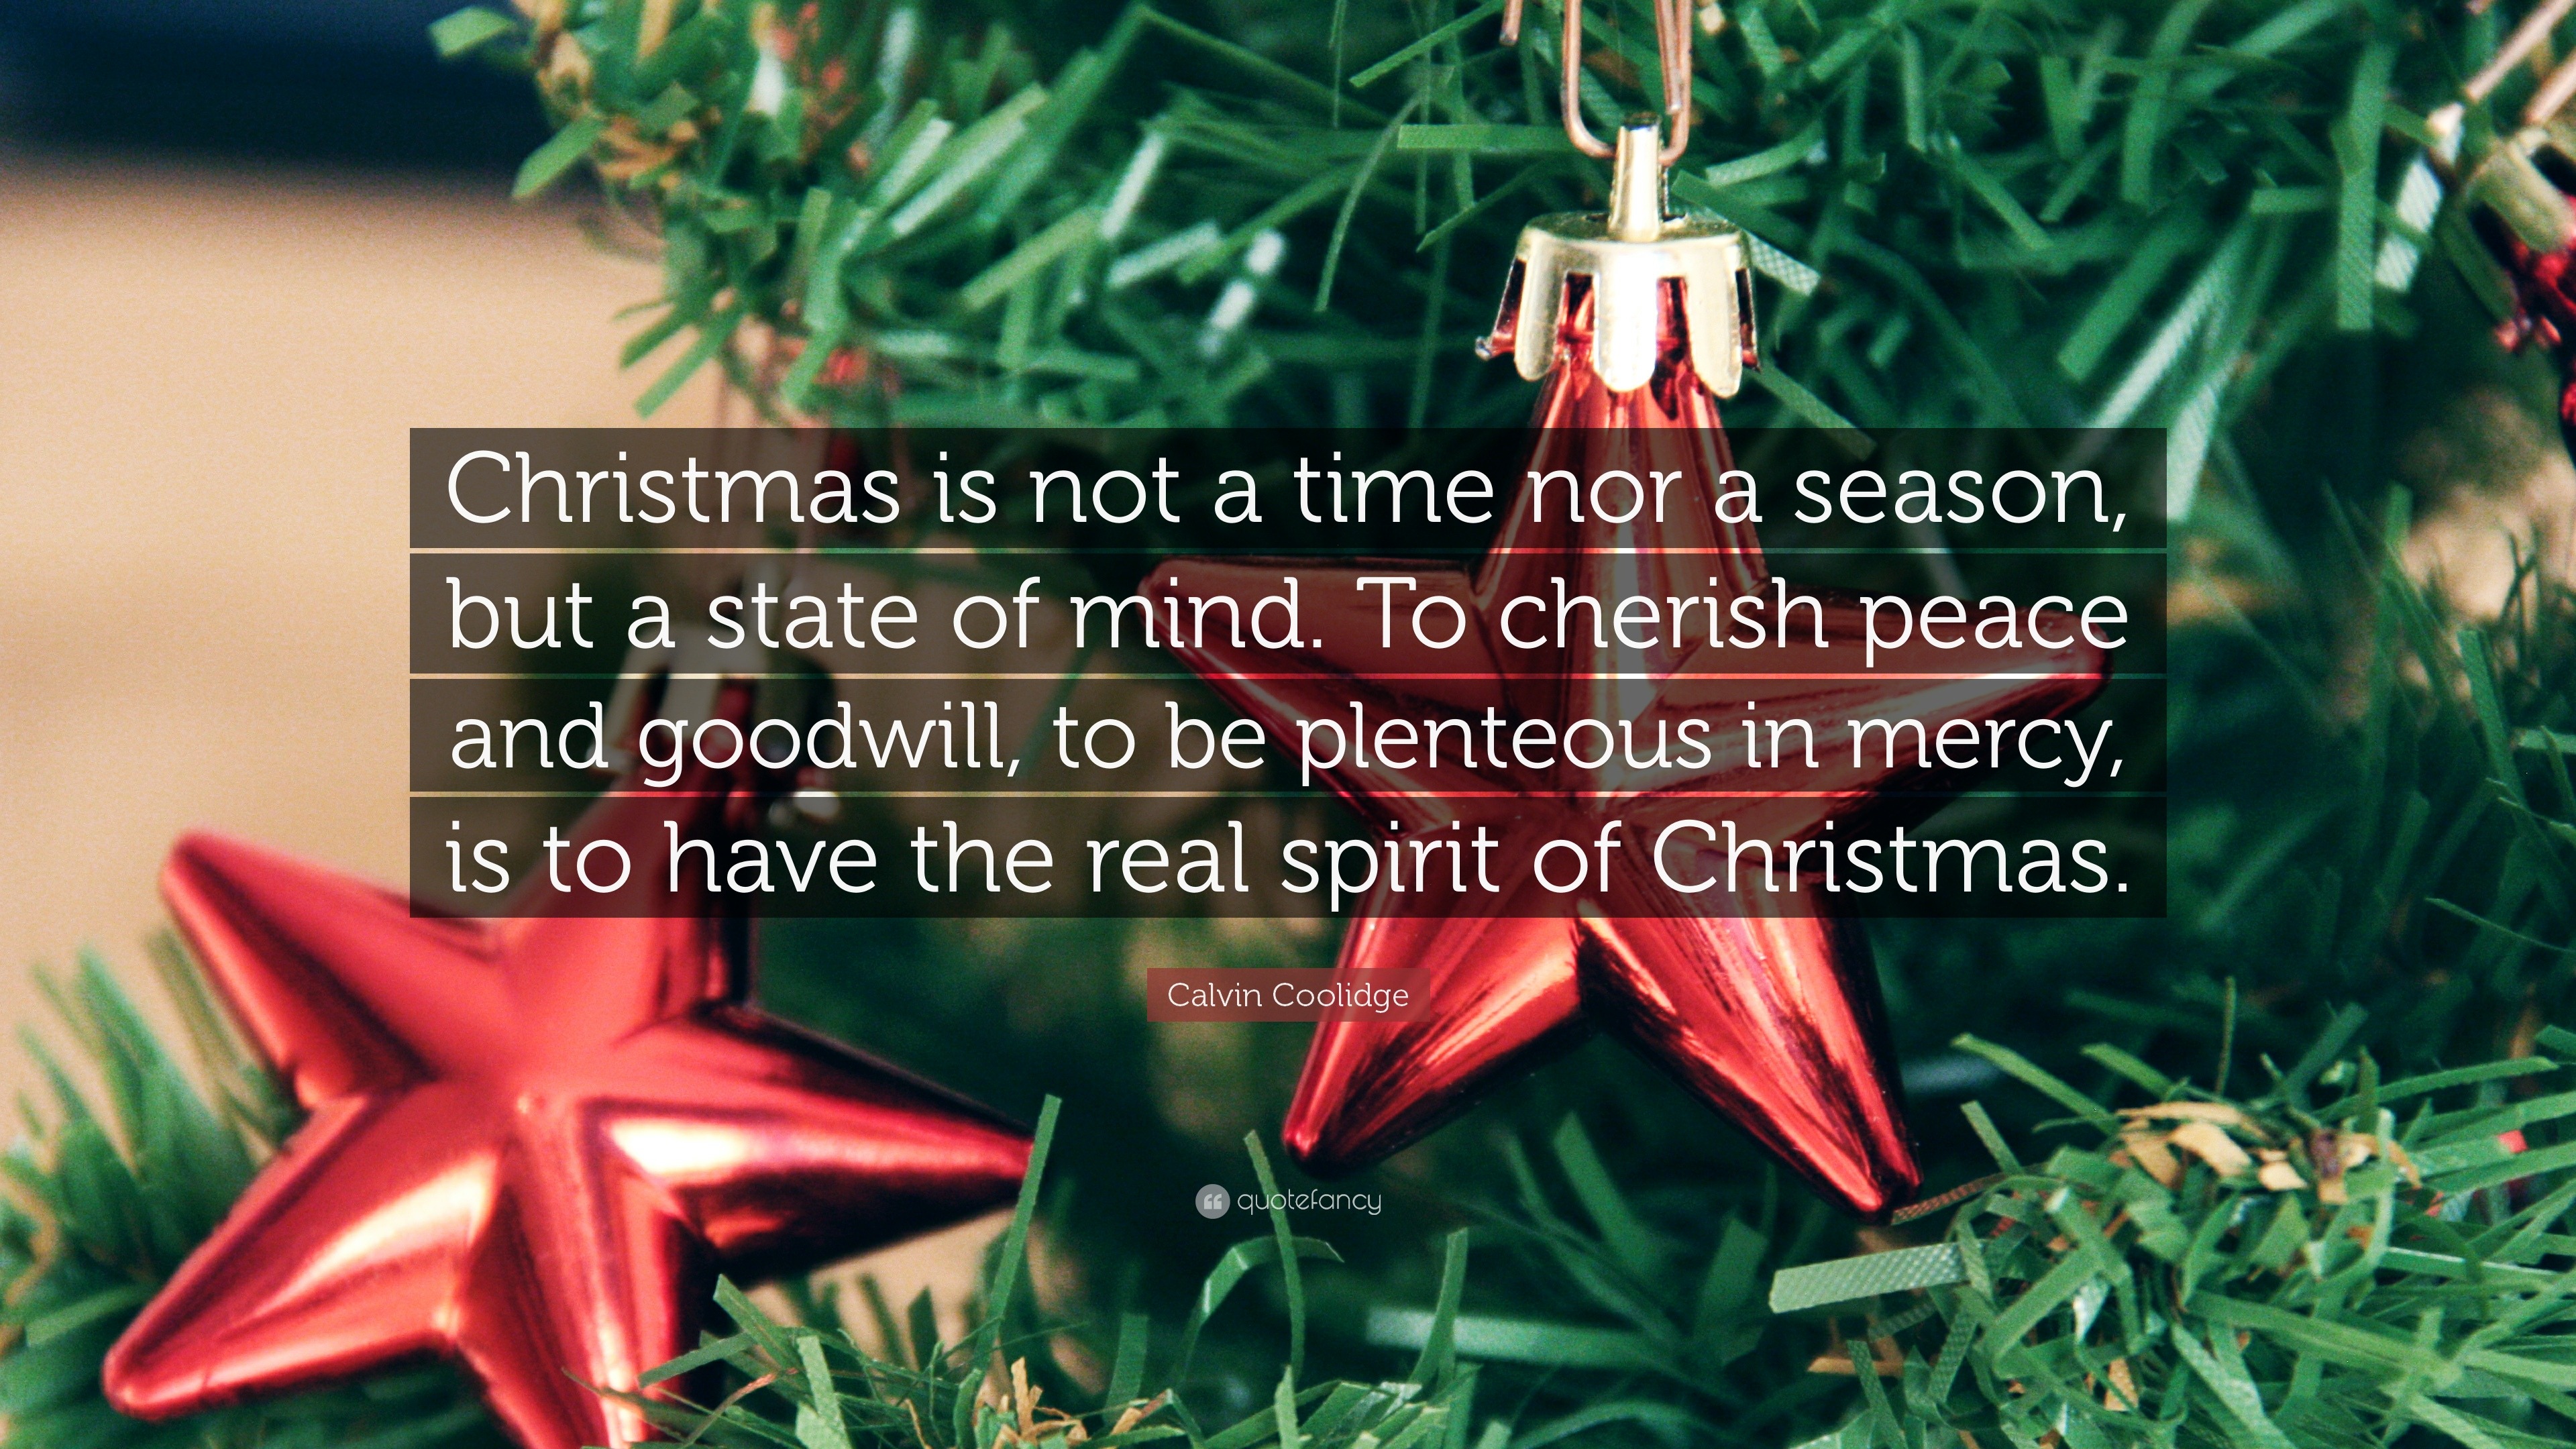 Calvin Coolidge Quote: “Christmas is not a time nor a season, but a ...